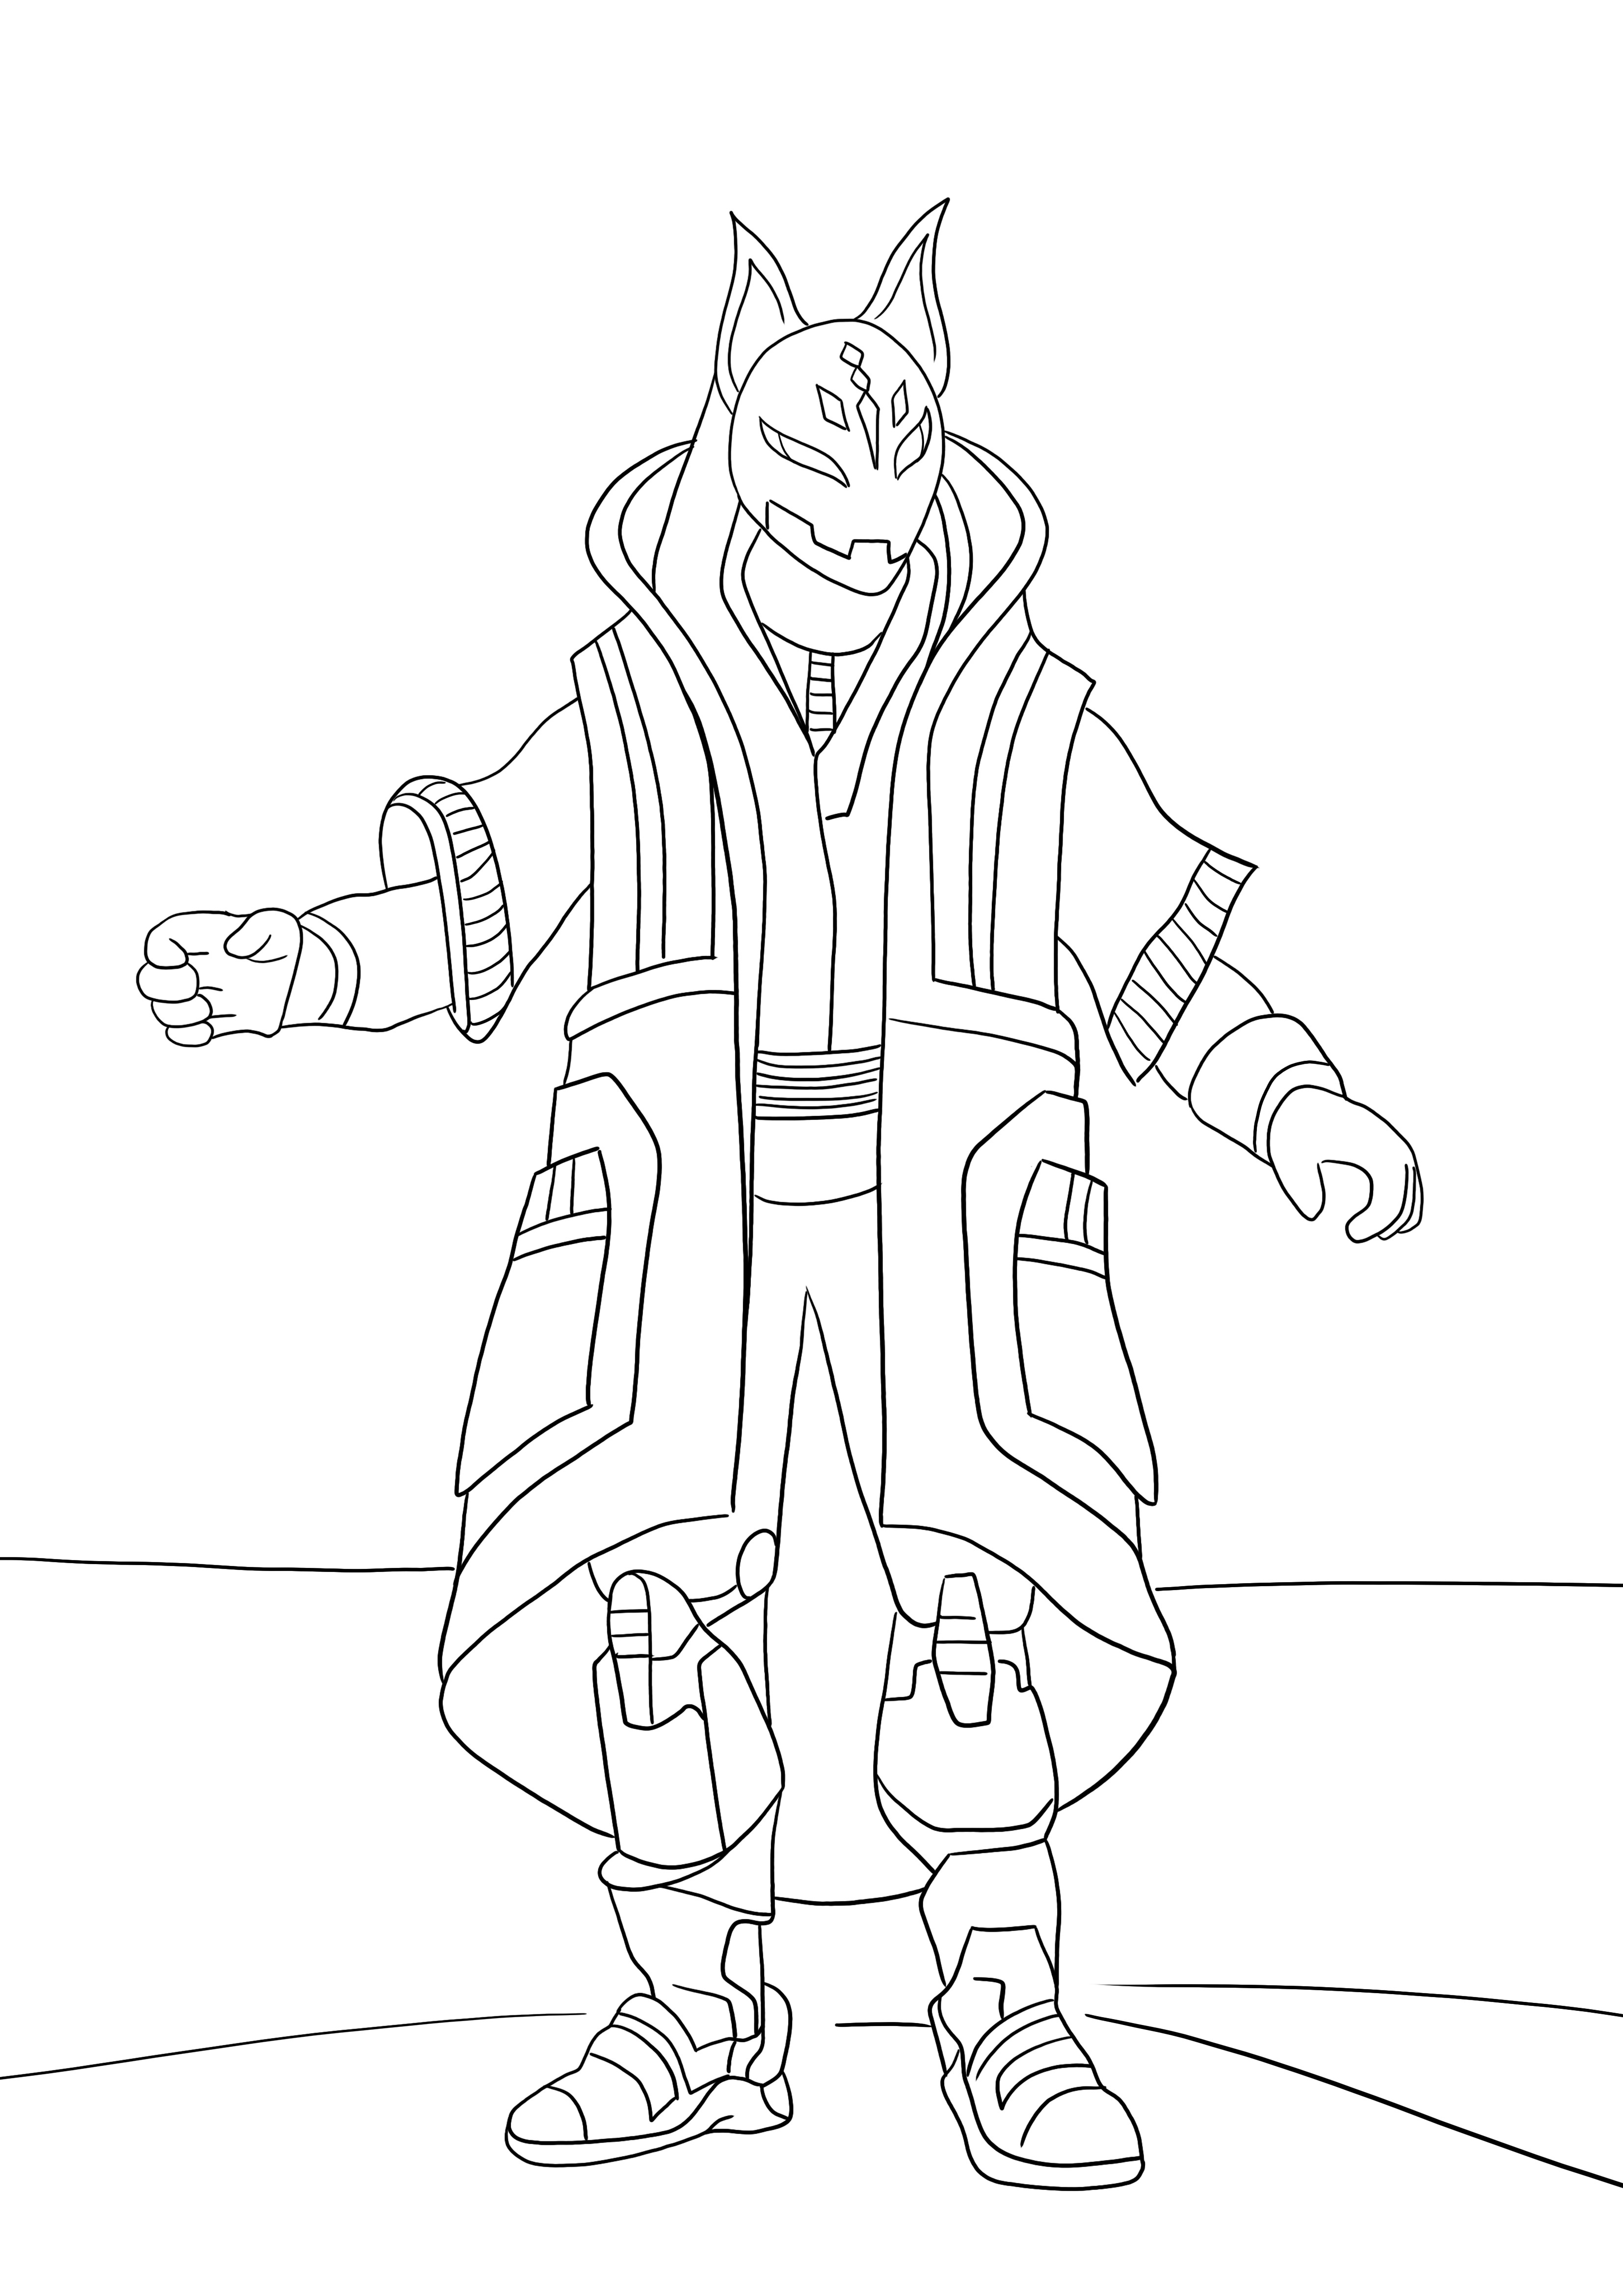 Here is a freebie of Fortnite Drift to be used for coloring while having fun image